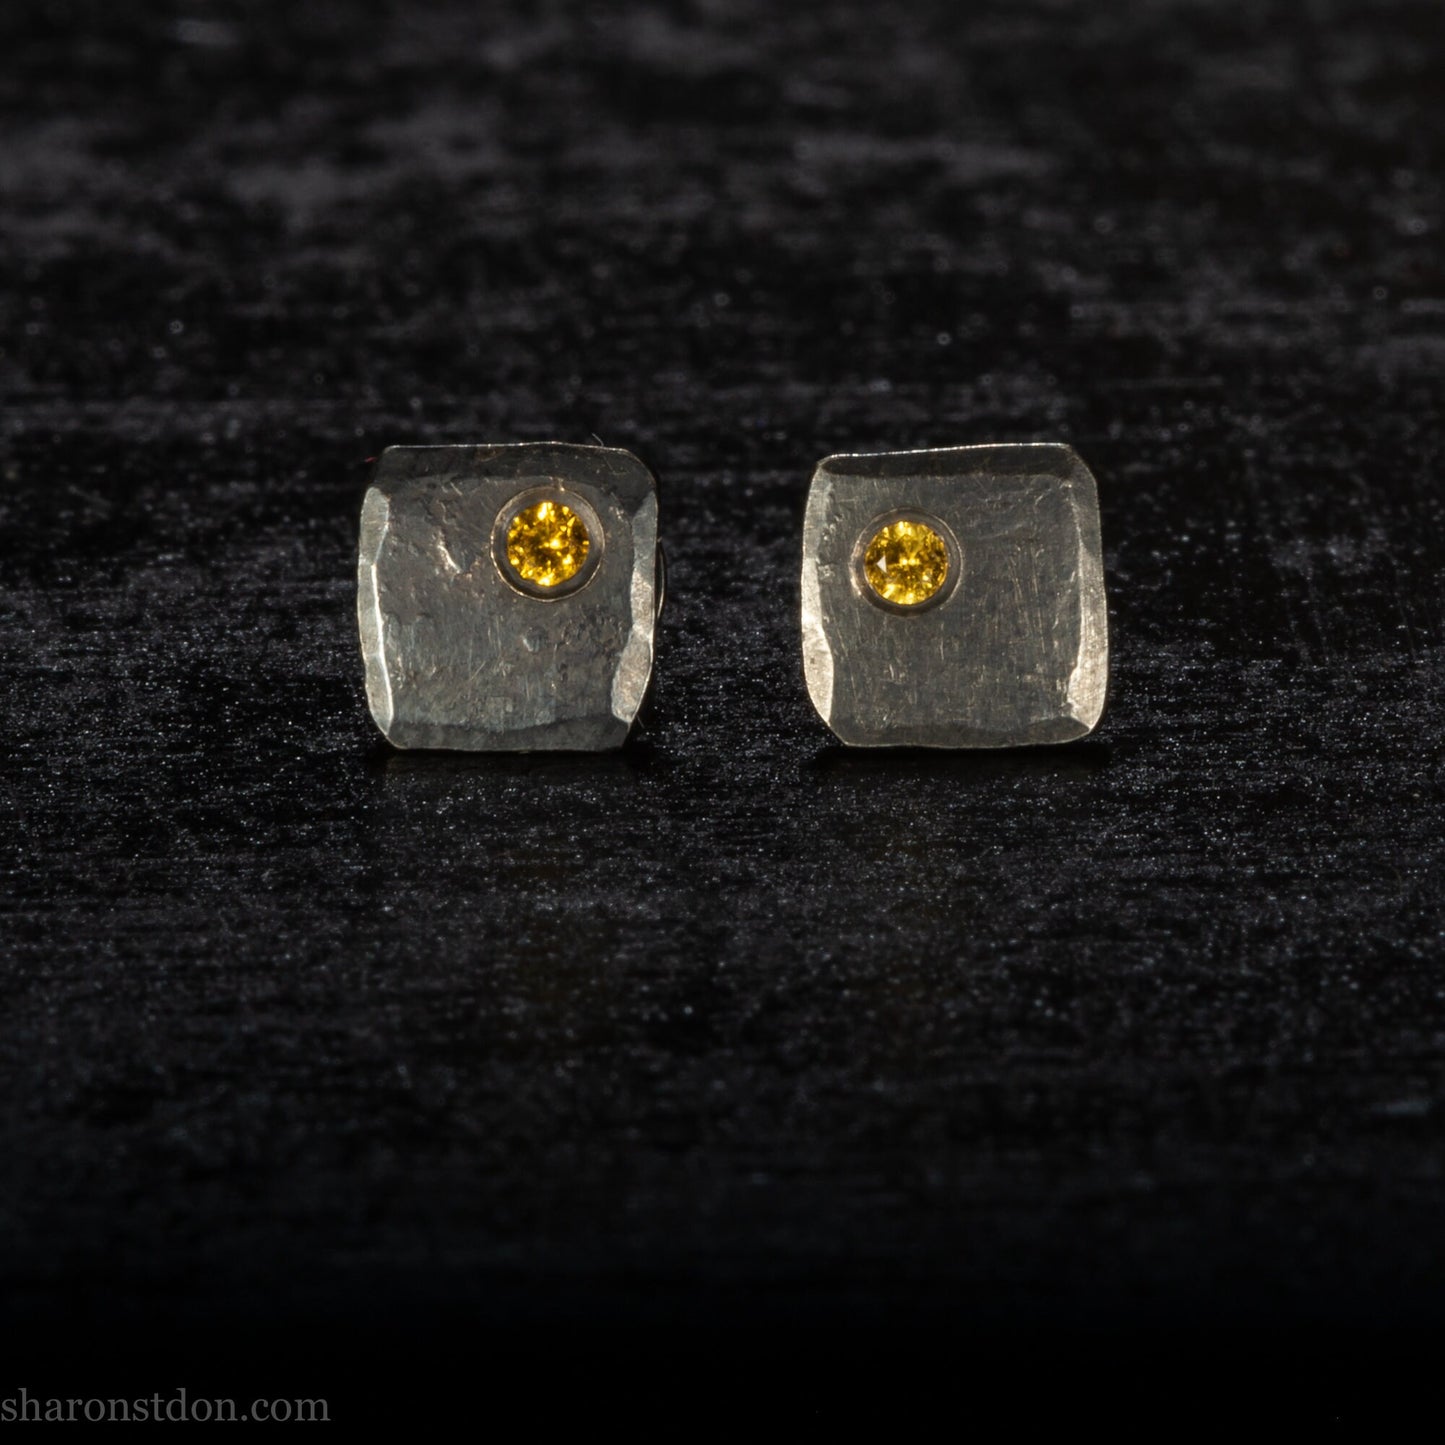 Handmade 925 sterling silver stud earrings handmade by Sharon SaintDon In North America. 7mm x 7mm hammered, square, oxidized black silver with a golden yellow topaz gemstone in the corner.